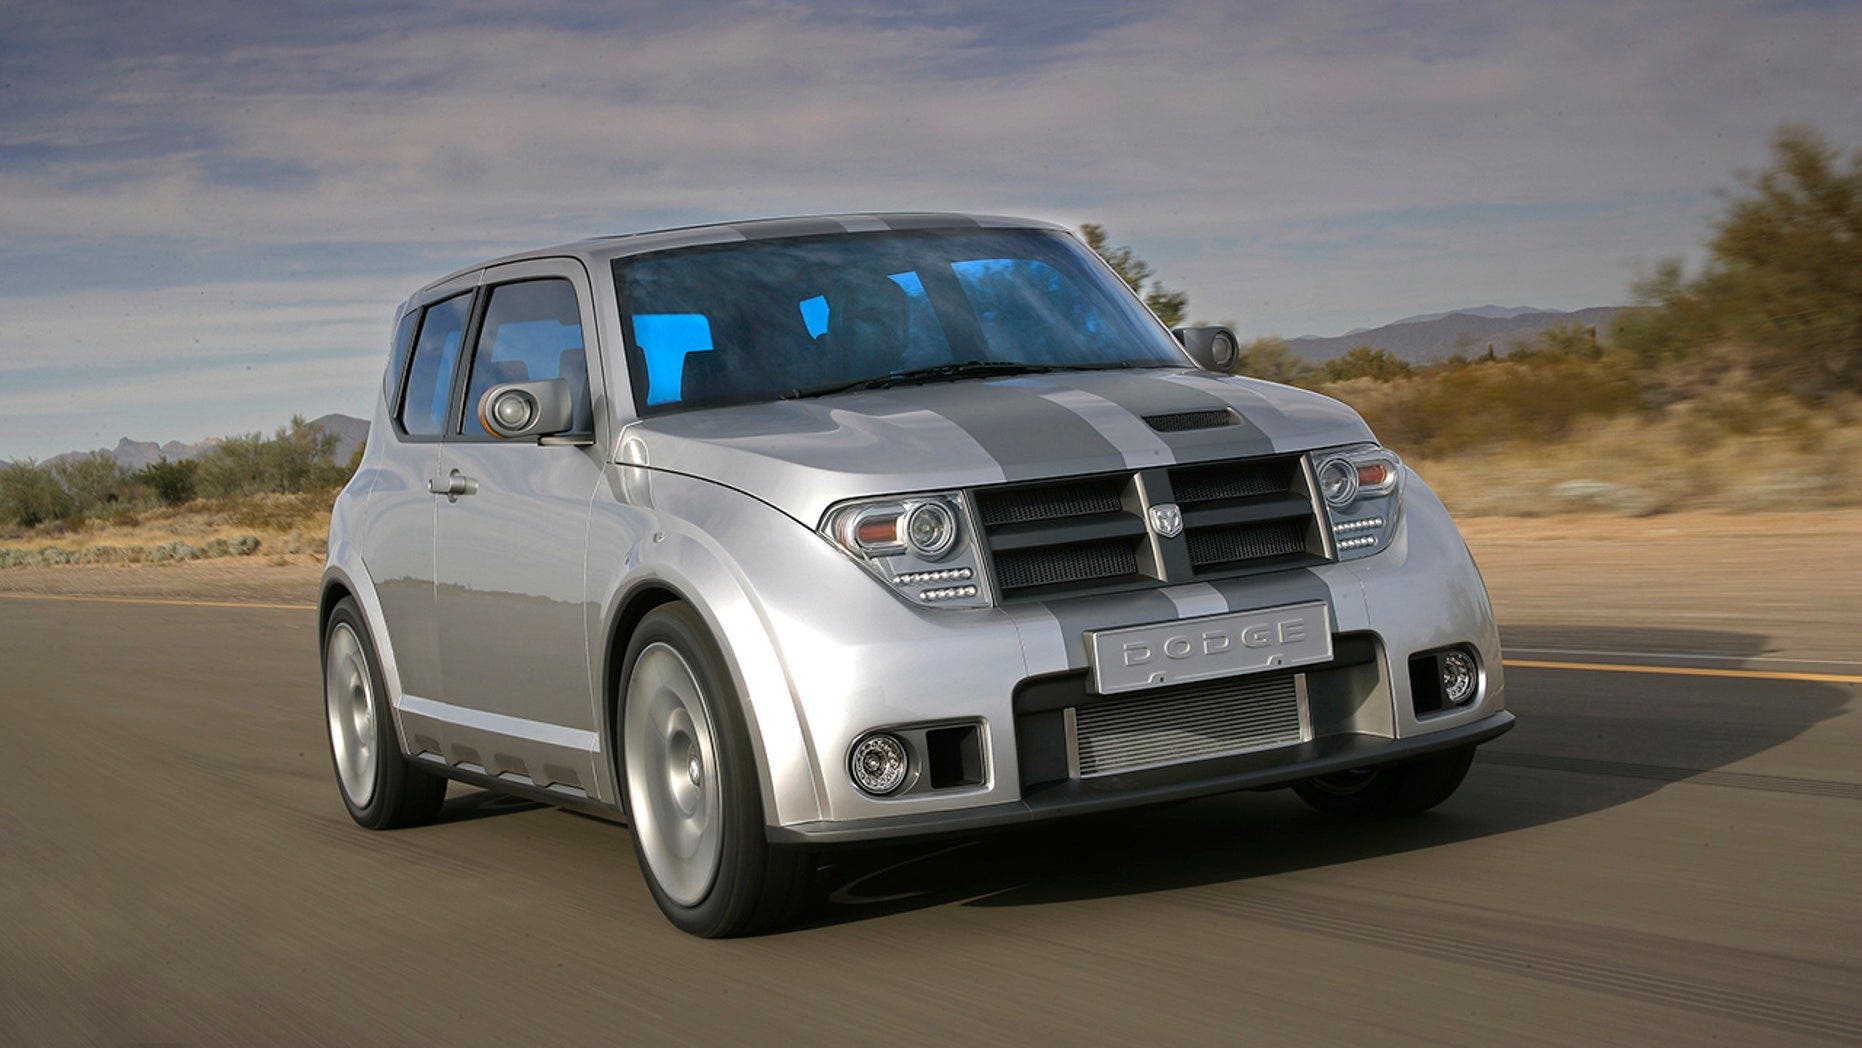 Dodge Hornet mini muscle car in the works, report says